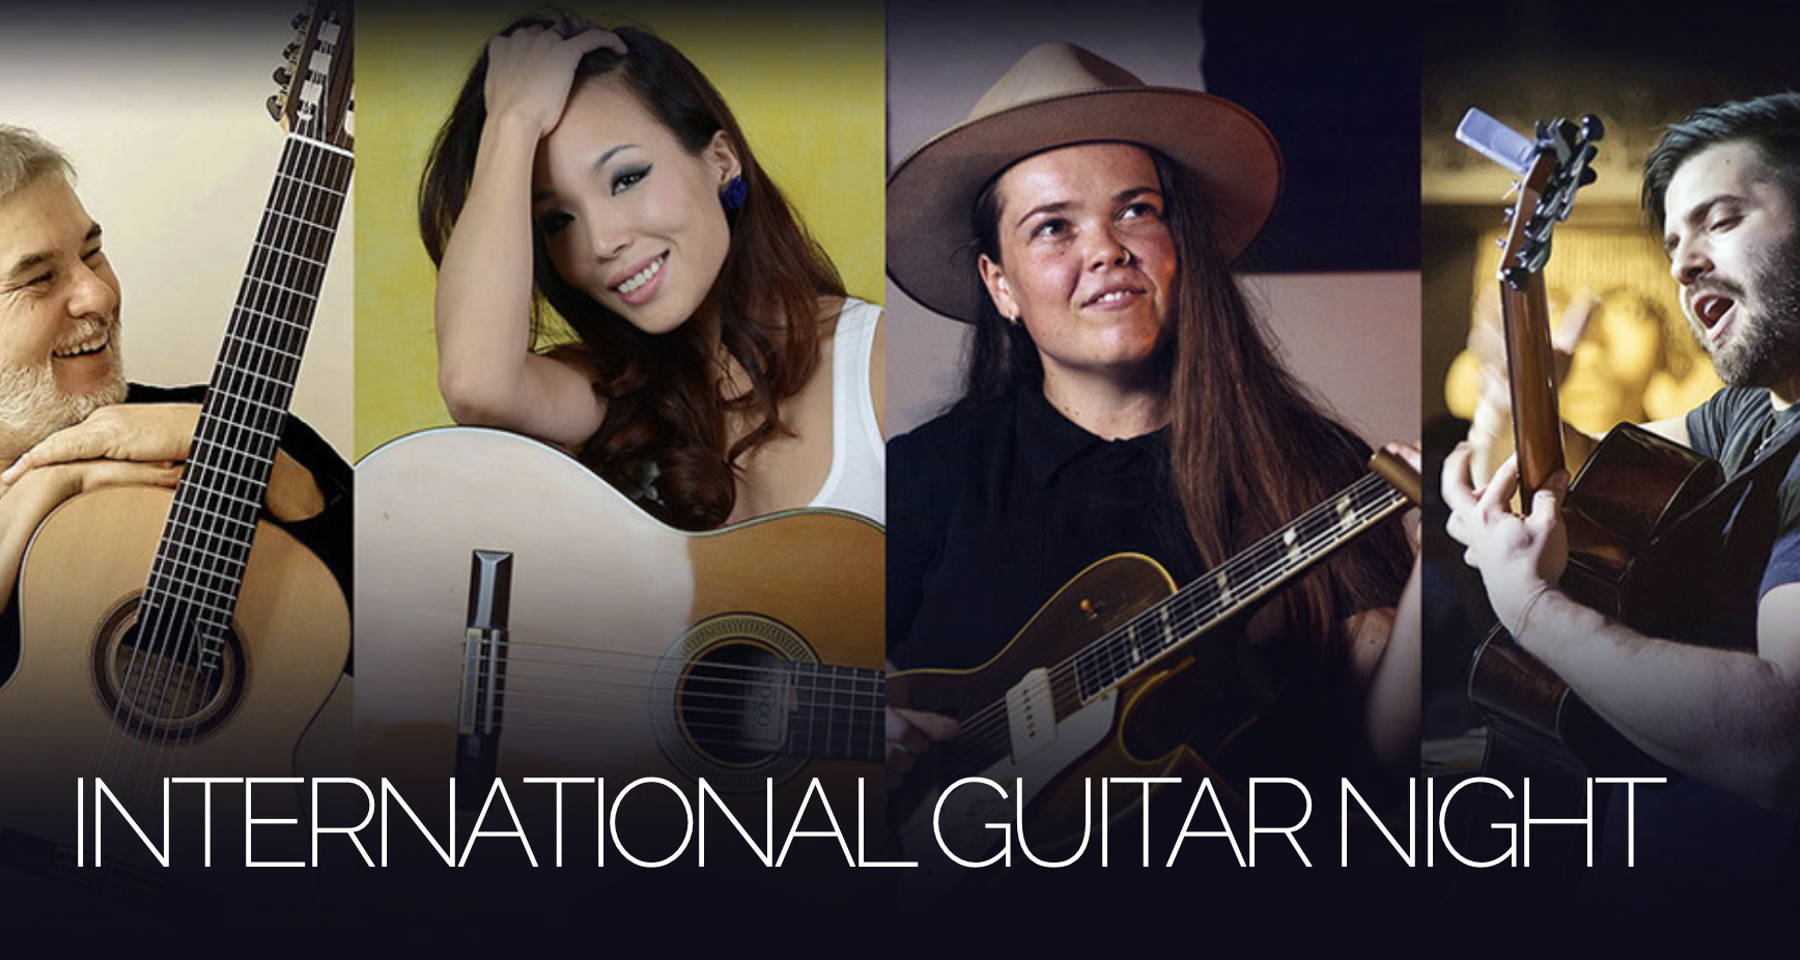 OMNI Foundation for the Performing Arts Presents: International Guitar Night